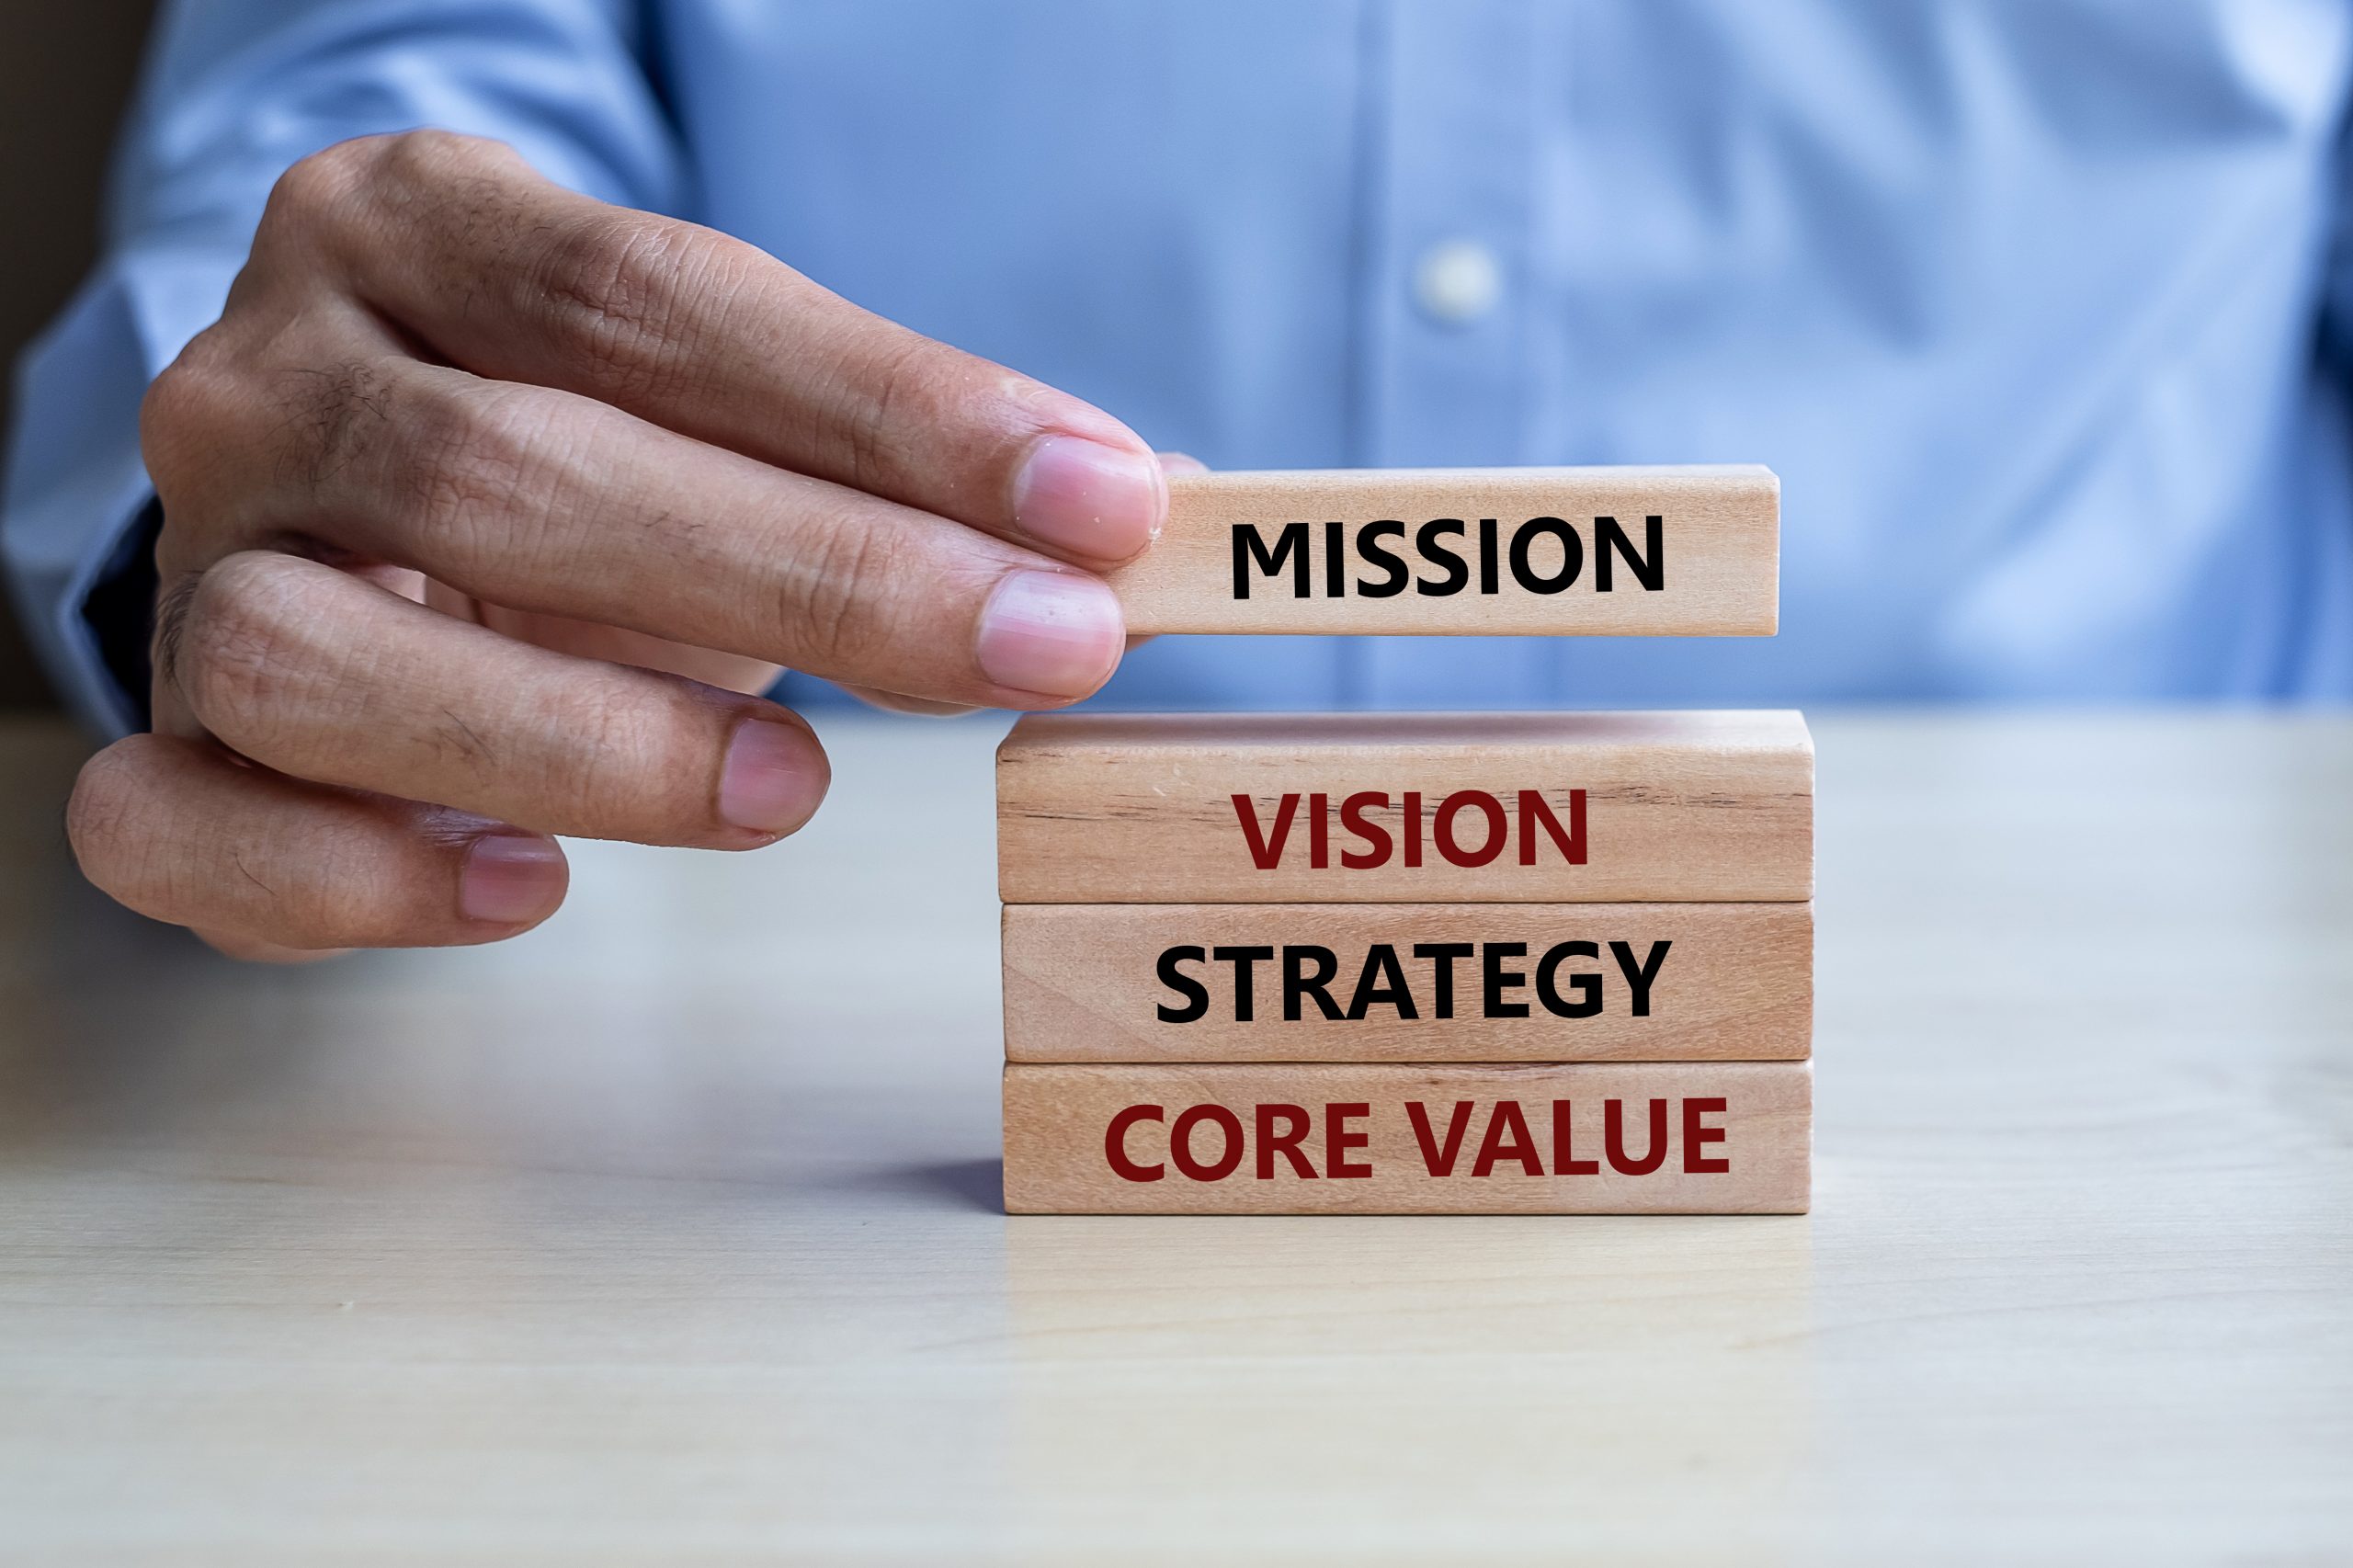 Our Vision, Mission & Values